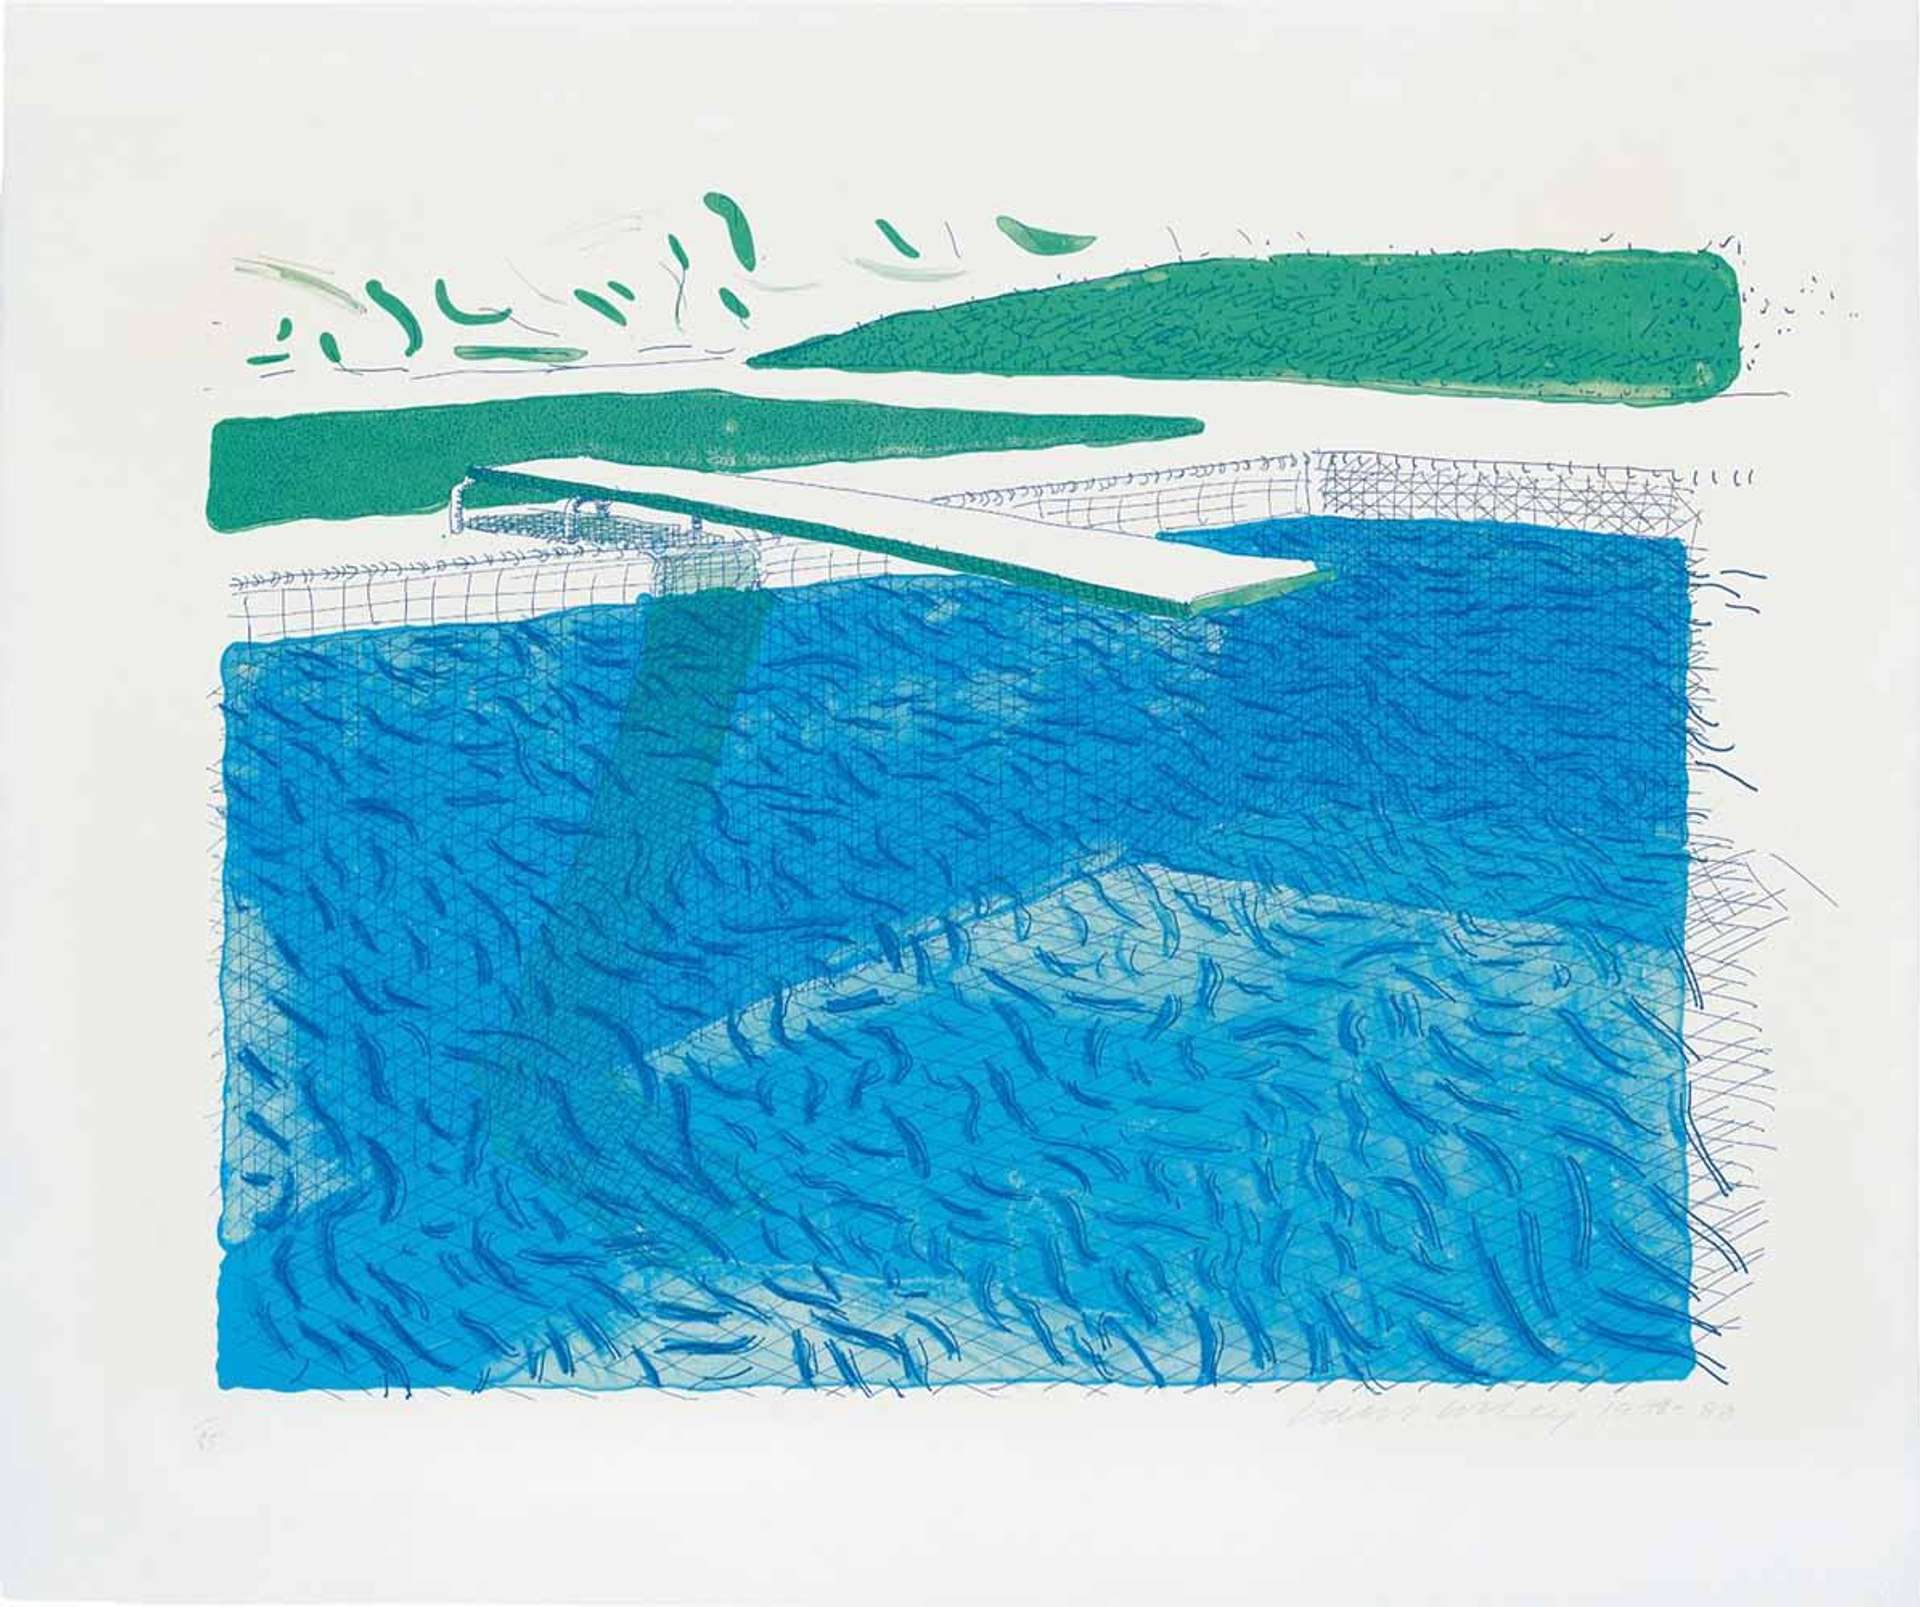 Lithographic Water Made Of Lines, Crayon, And Two Blue Washes by David Hockney  - MyArtBroker 